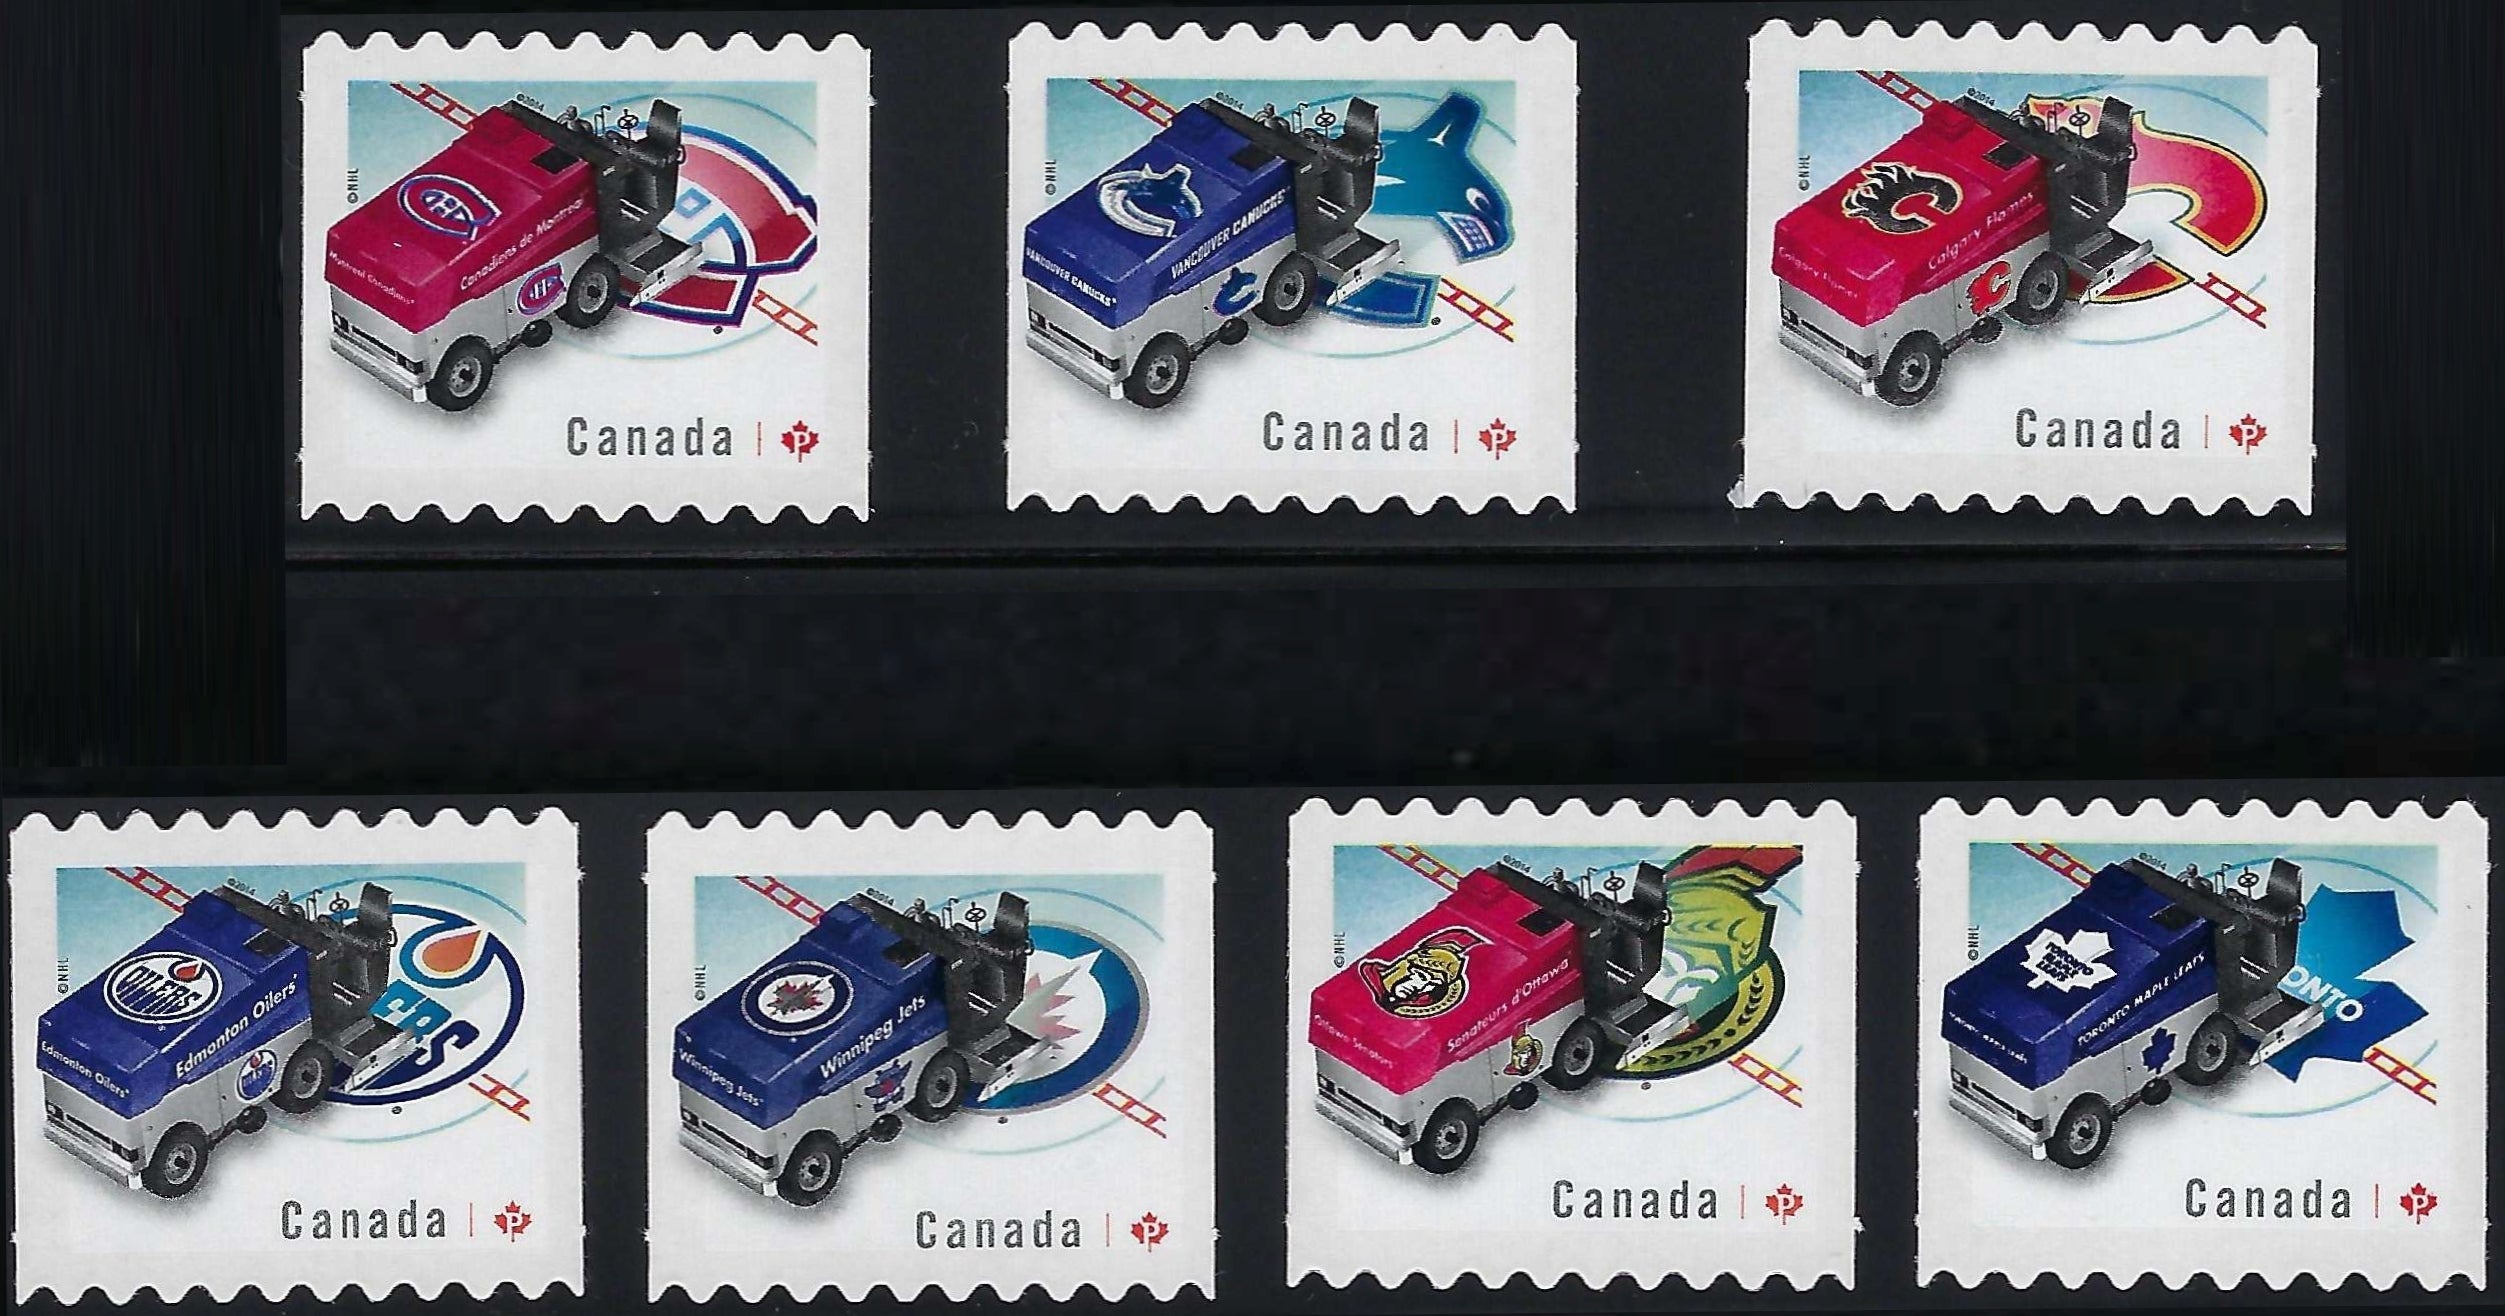 Vancouver Canucks - Canada Postage Stamp